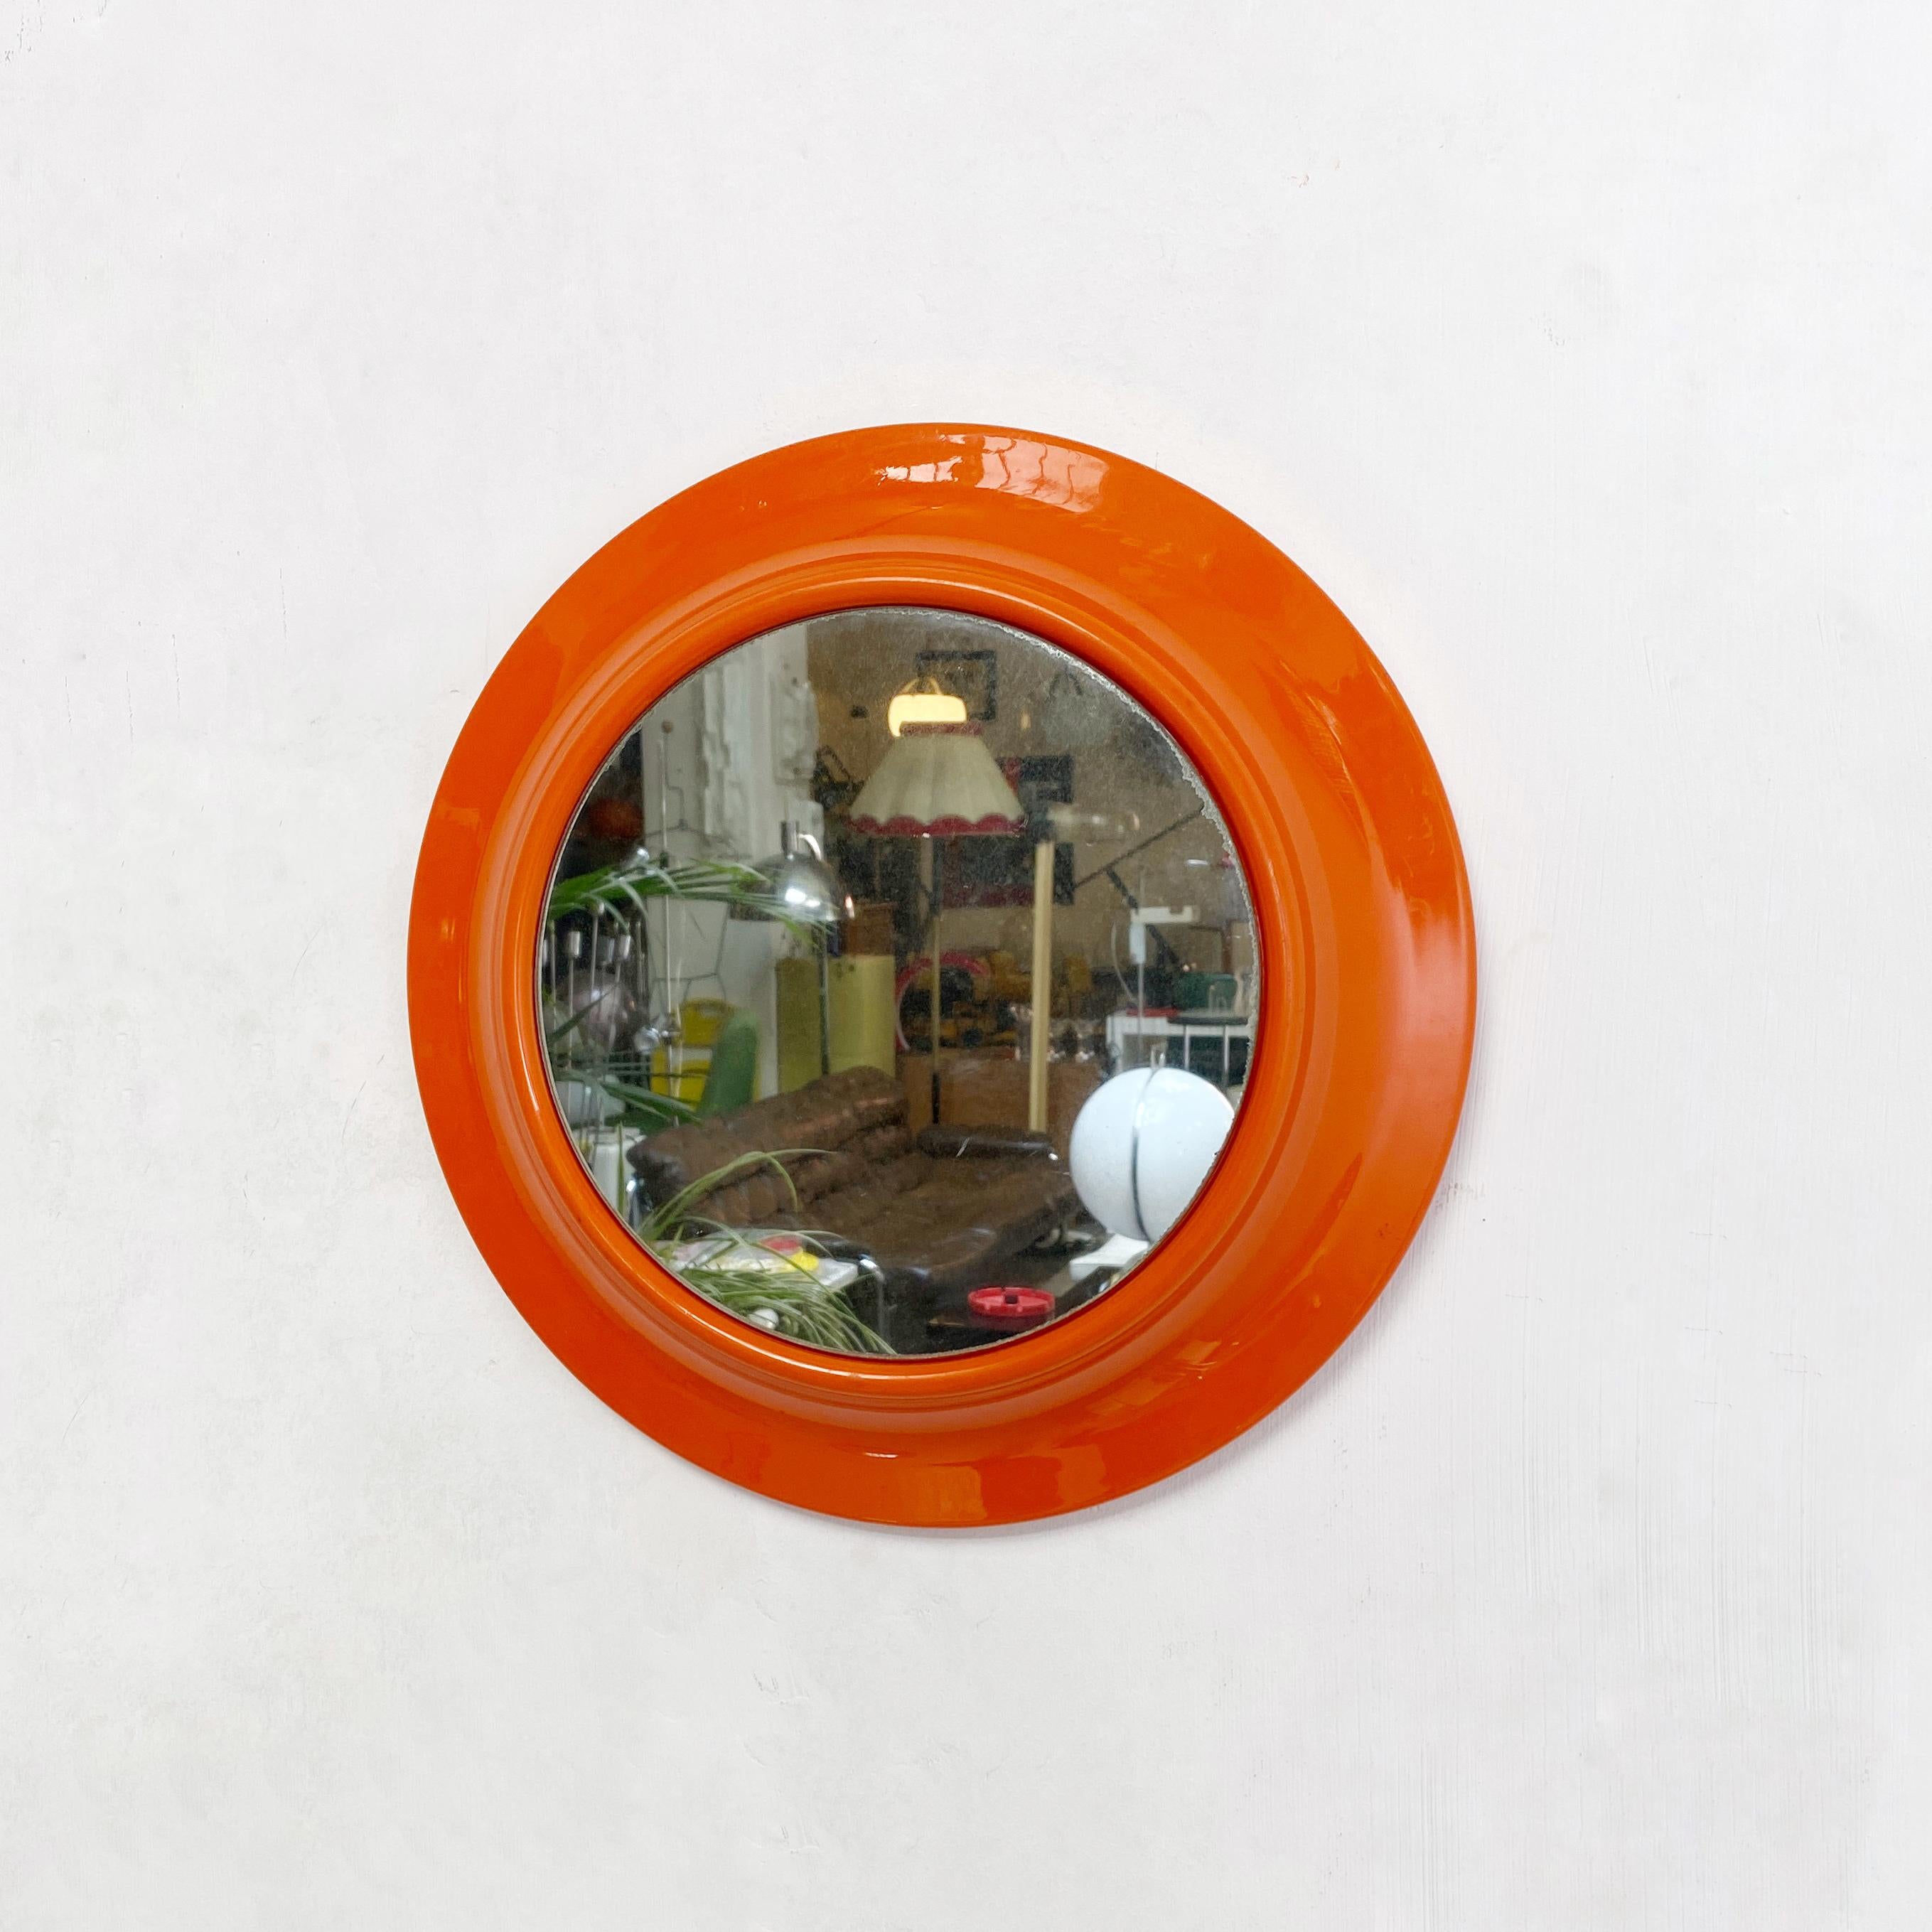 Round orange plastic mirror, 1980s
Small size mirror with round orange plastic frame. Model 080, branded Cattaneo, made in Italy.

Good condition, evident signs on the mirror.

Measures in cm 30x6.